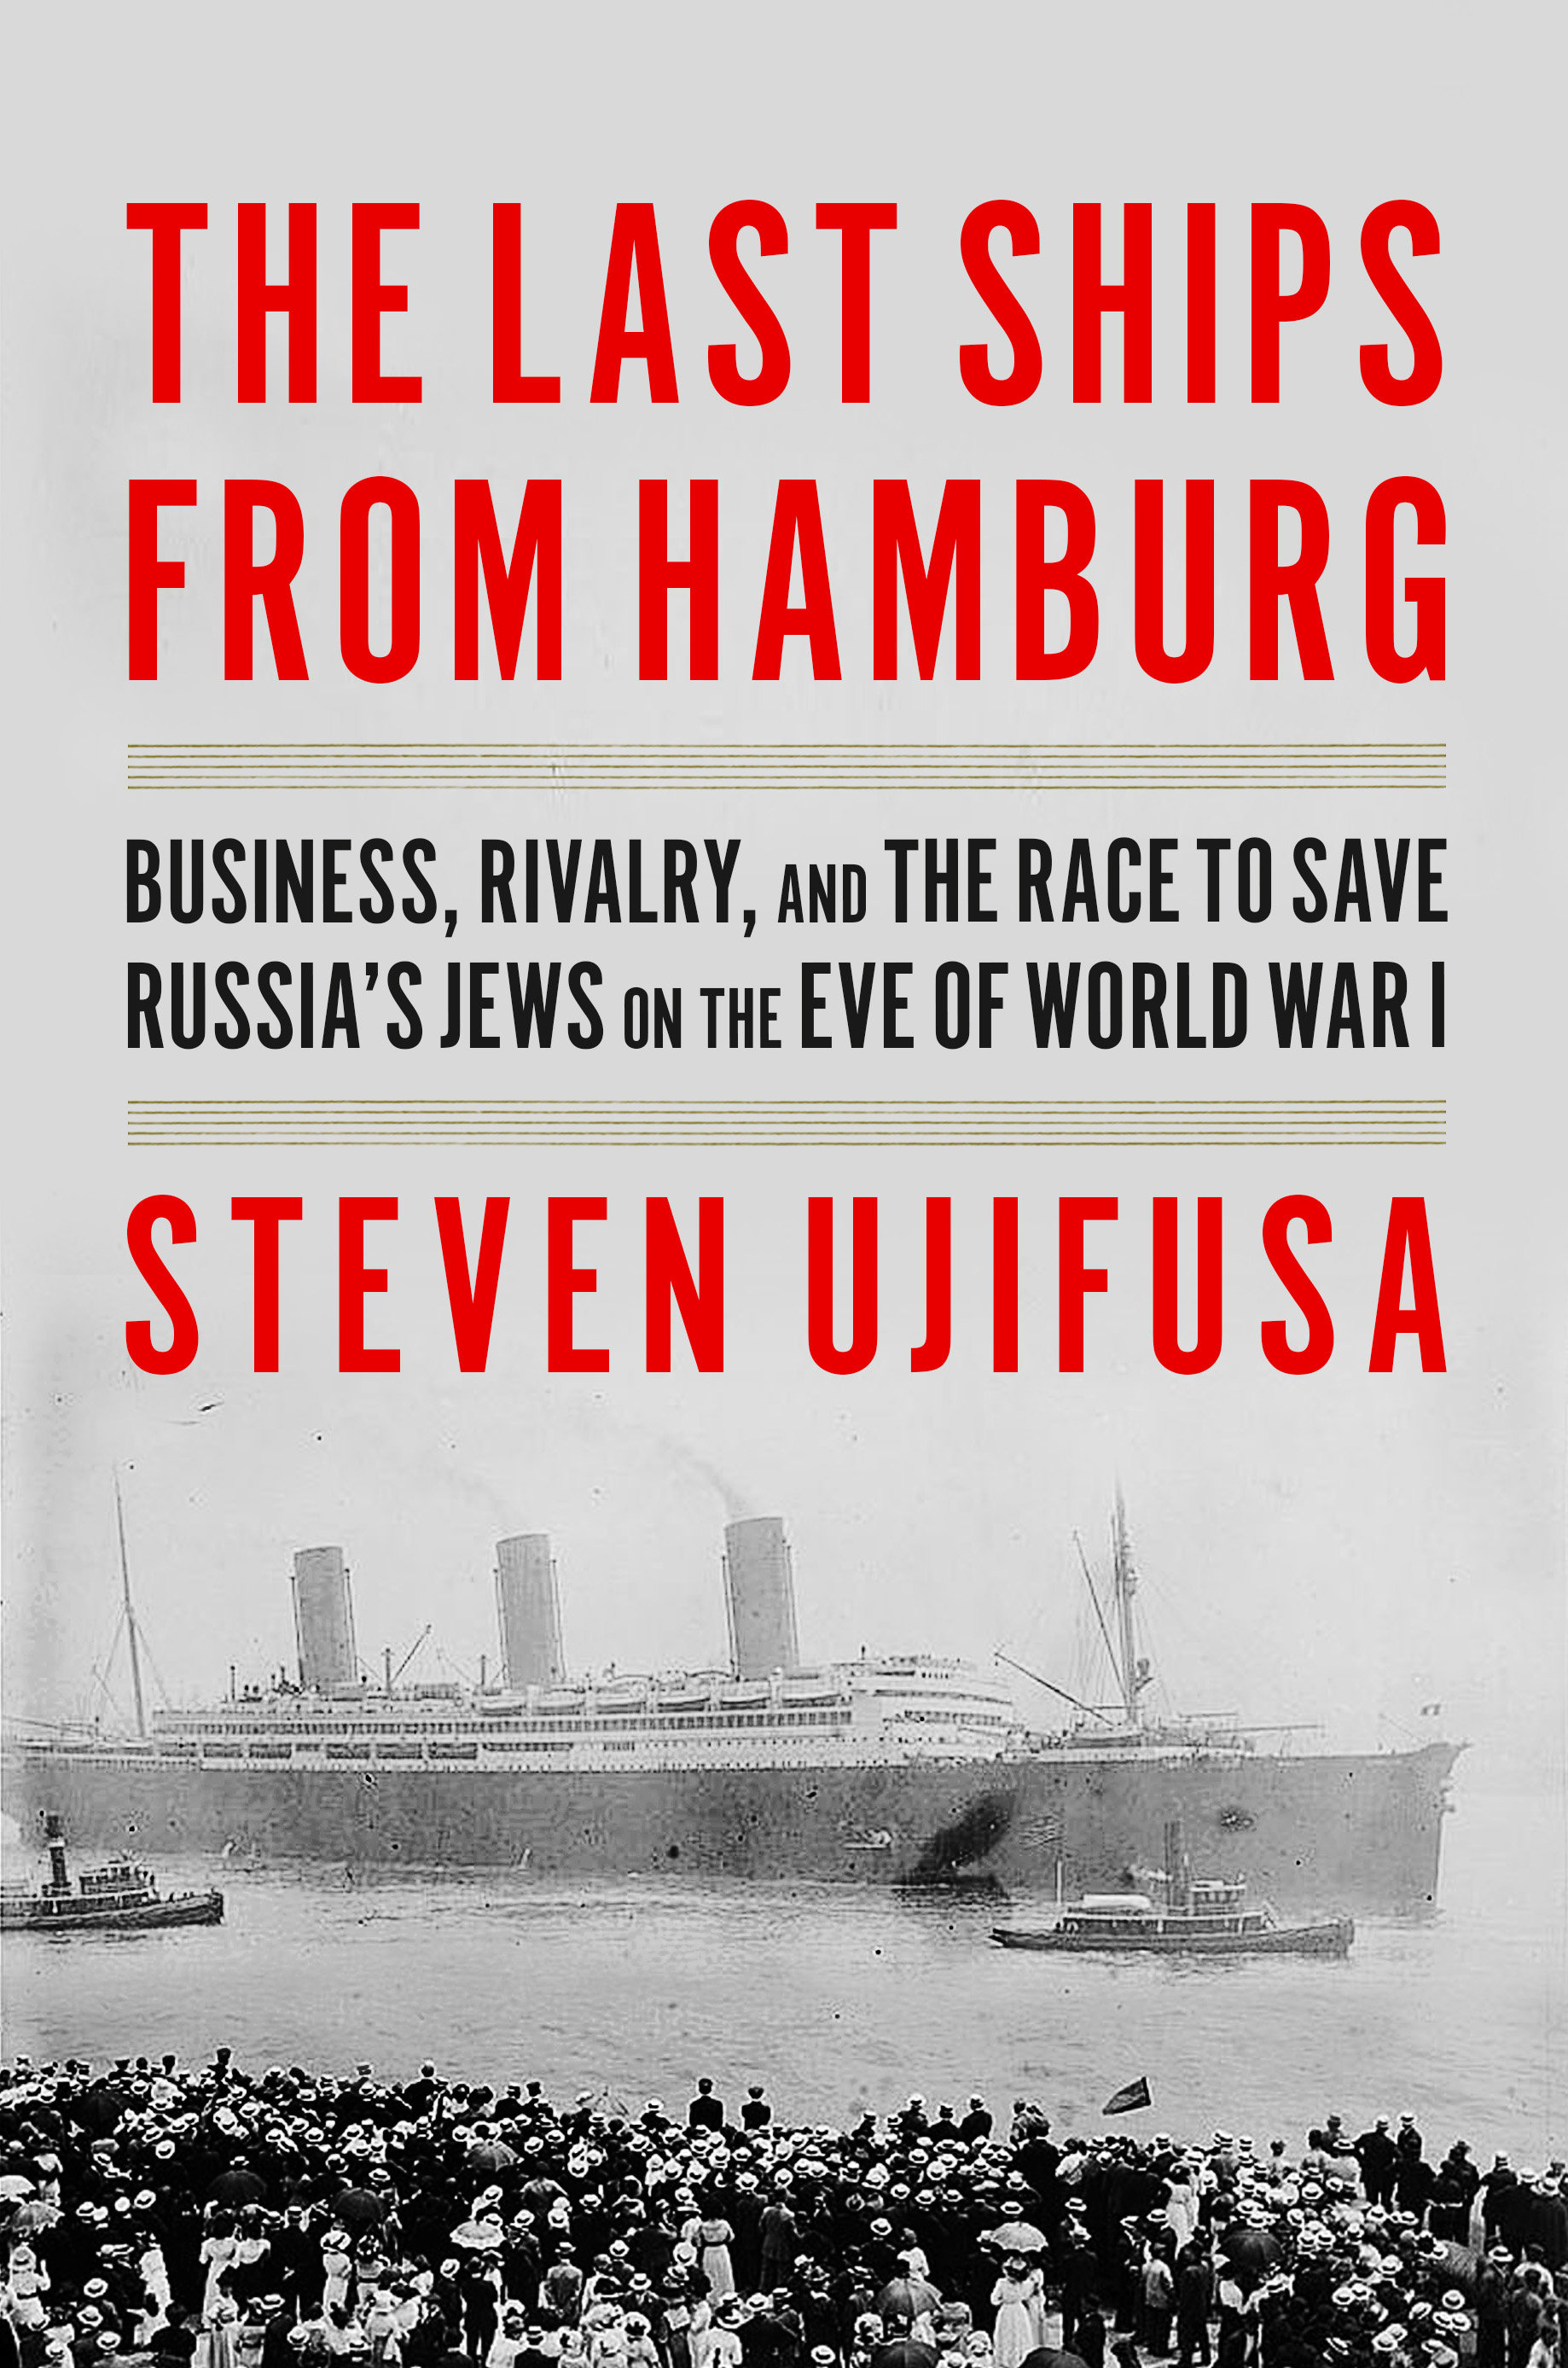 The Last Ships from Hamburg – Steven Ujifusa’s compelling book details how business leaders and financiers helped rescue the Jews of Eastern Europe from oppression.